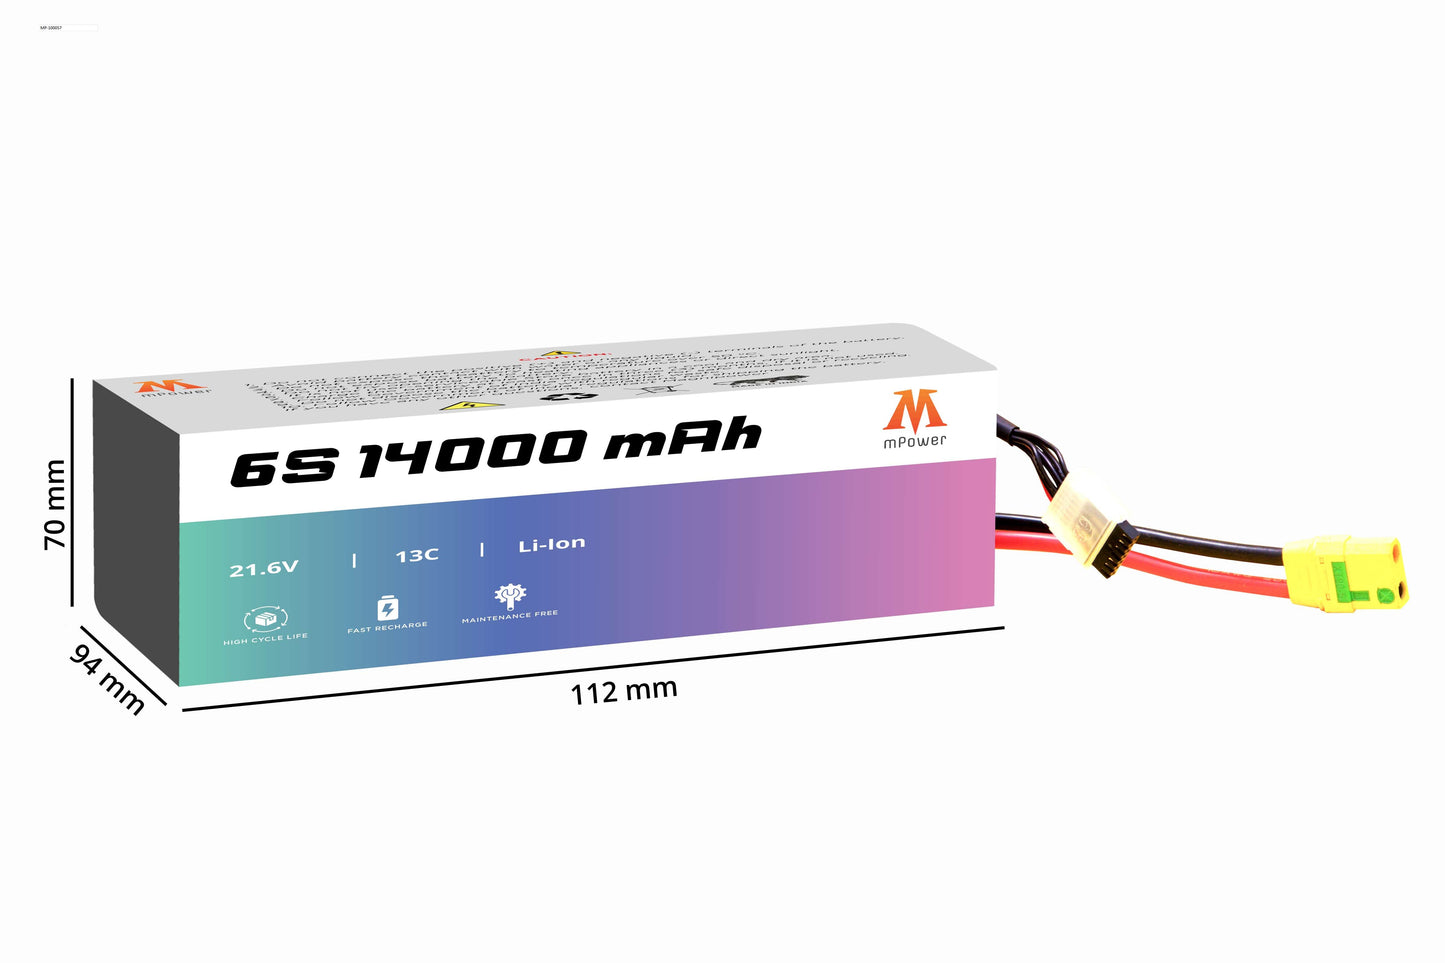 mPower 6S 14000mAh Lithium-Ion Battery for Surveillance Drones